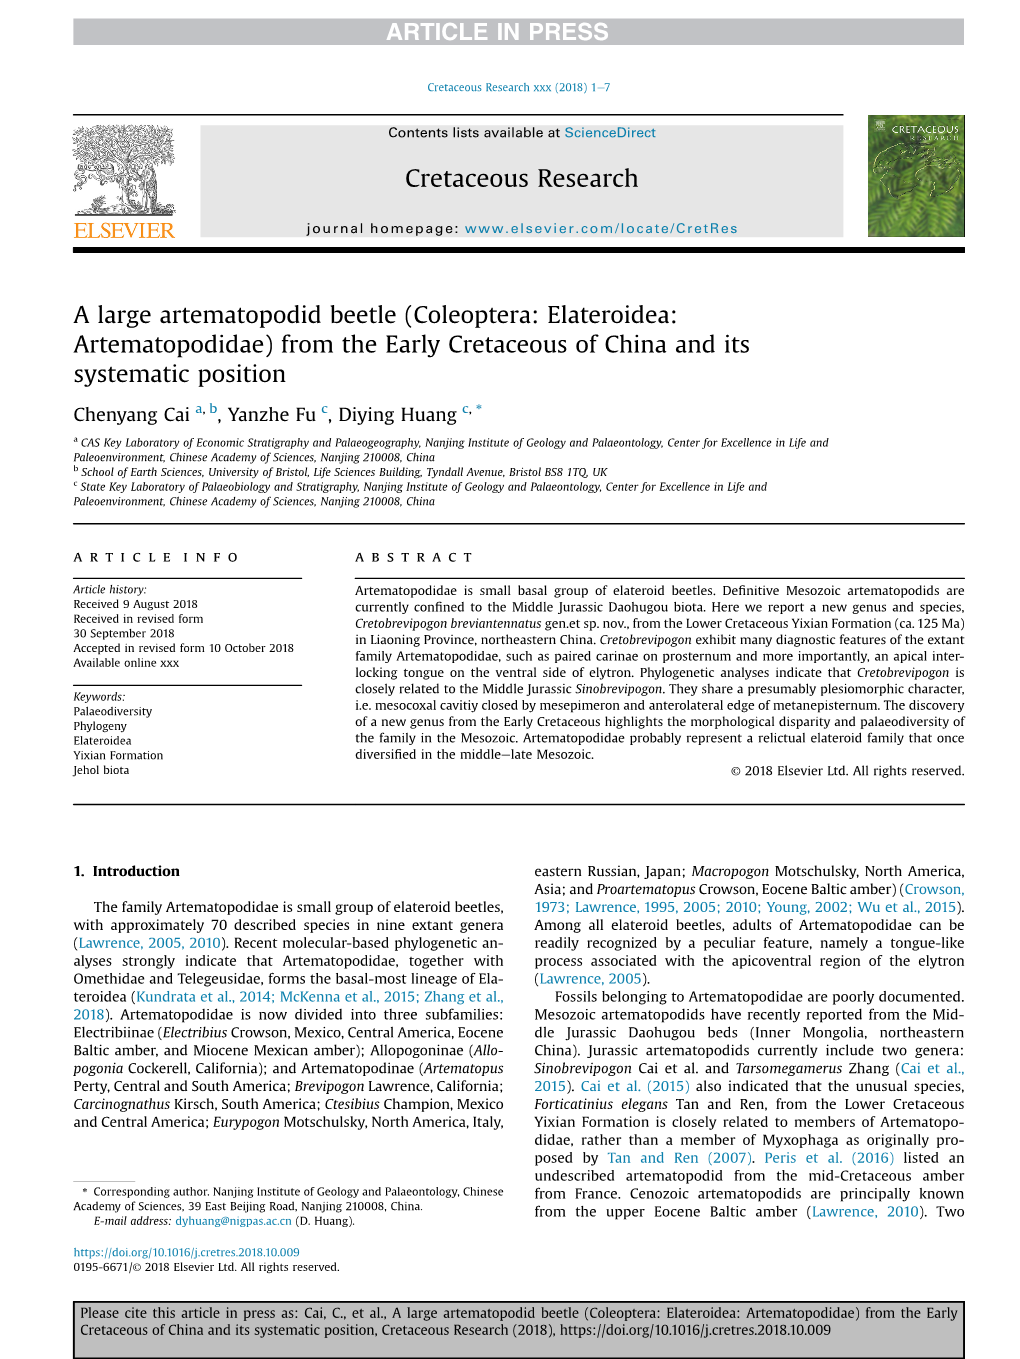 Coleoptera: Elateroidea: Artematopodidae) from the Early Cretaceous of China and Its Systematic Position